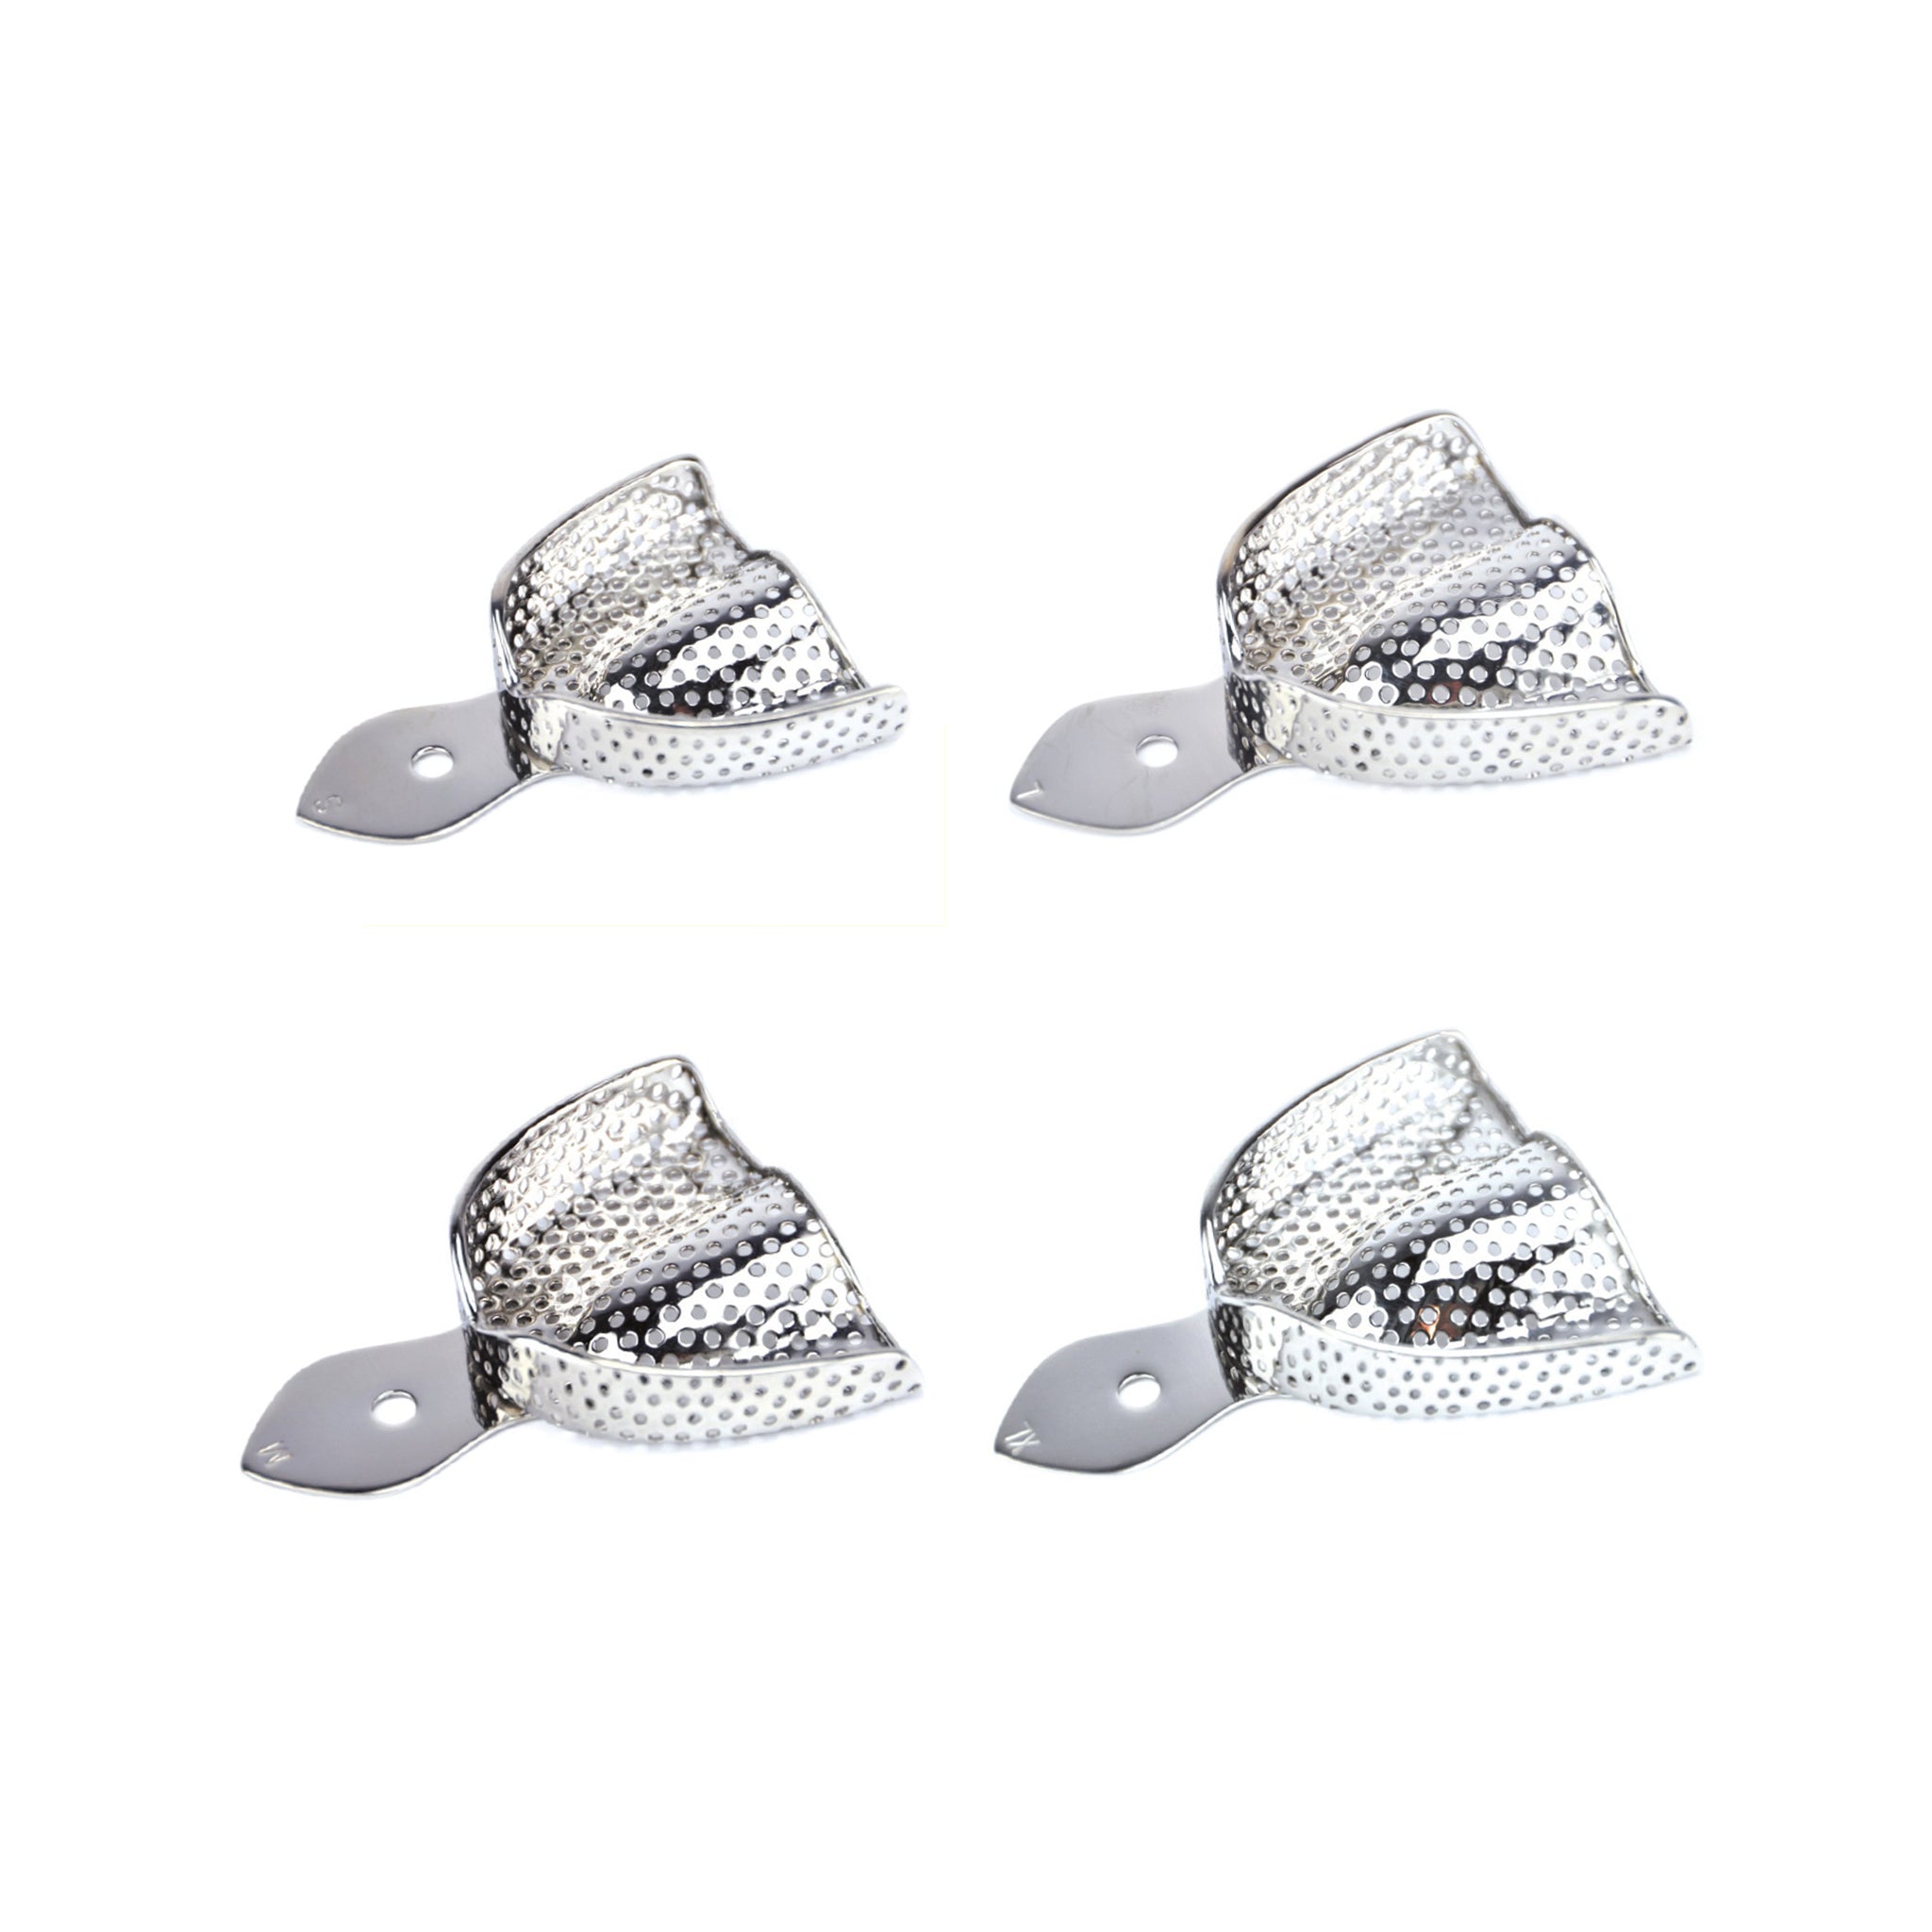 Impression tray<br> Perforated